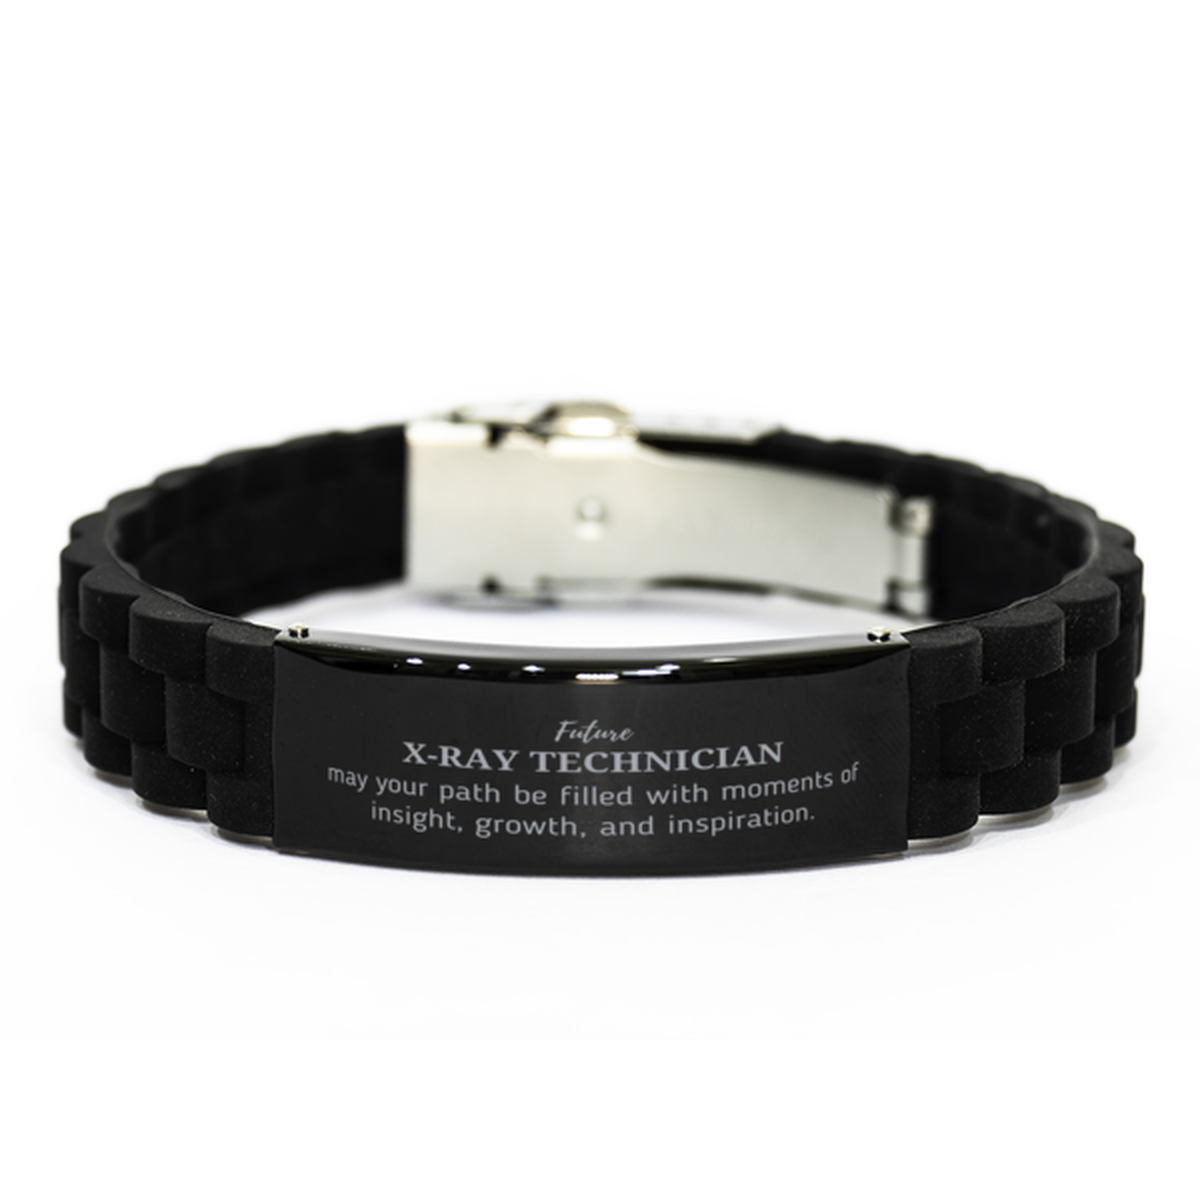 Future X-Ray Technician Gifts, May your path be filled with moments of insight, Graduation Gifts for New X-Ray Technician, Christmas Unique Black Glidelock Clasp Bracelet For Men, Women, Friends